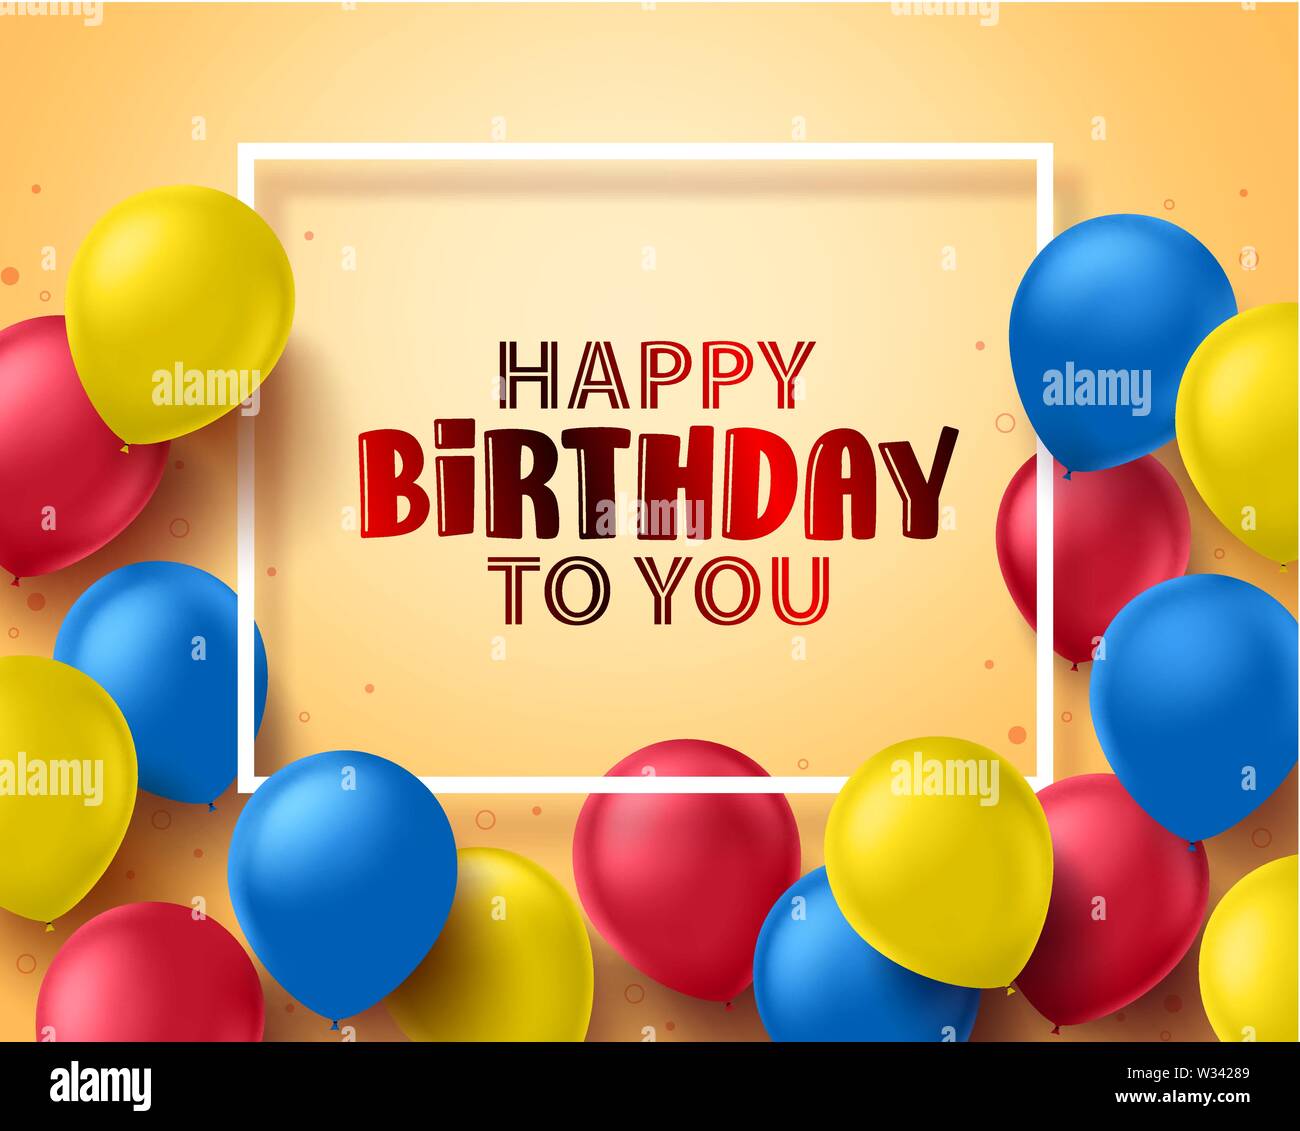 Happy birthday greeting card design with colorful birthday ...